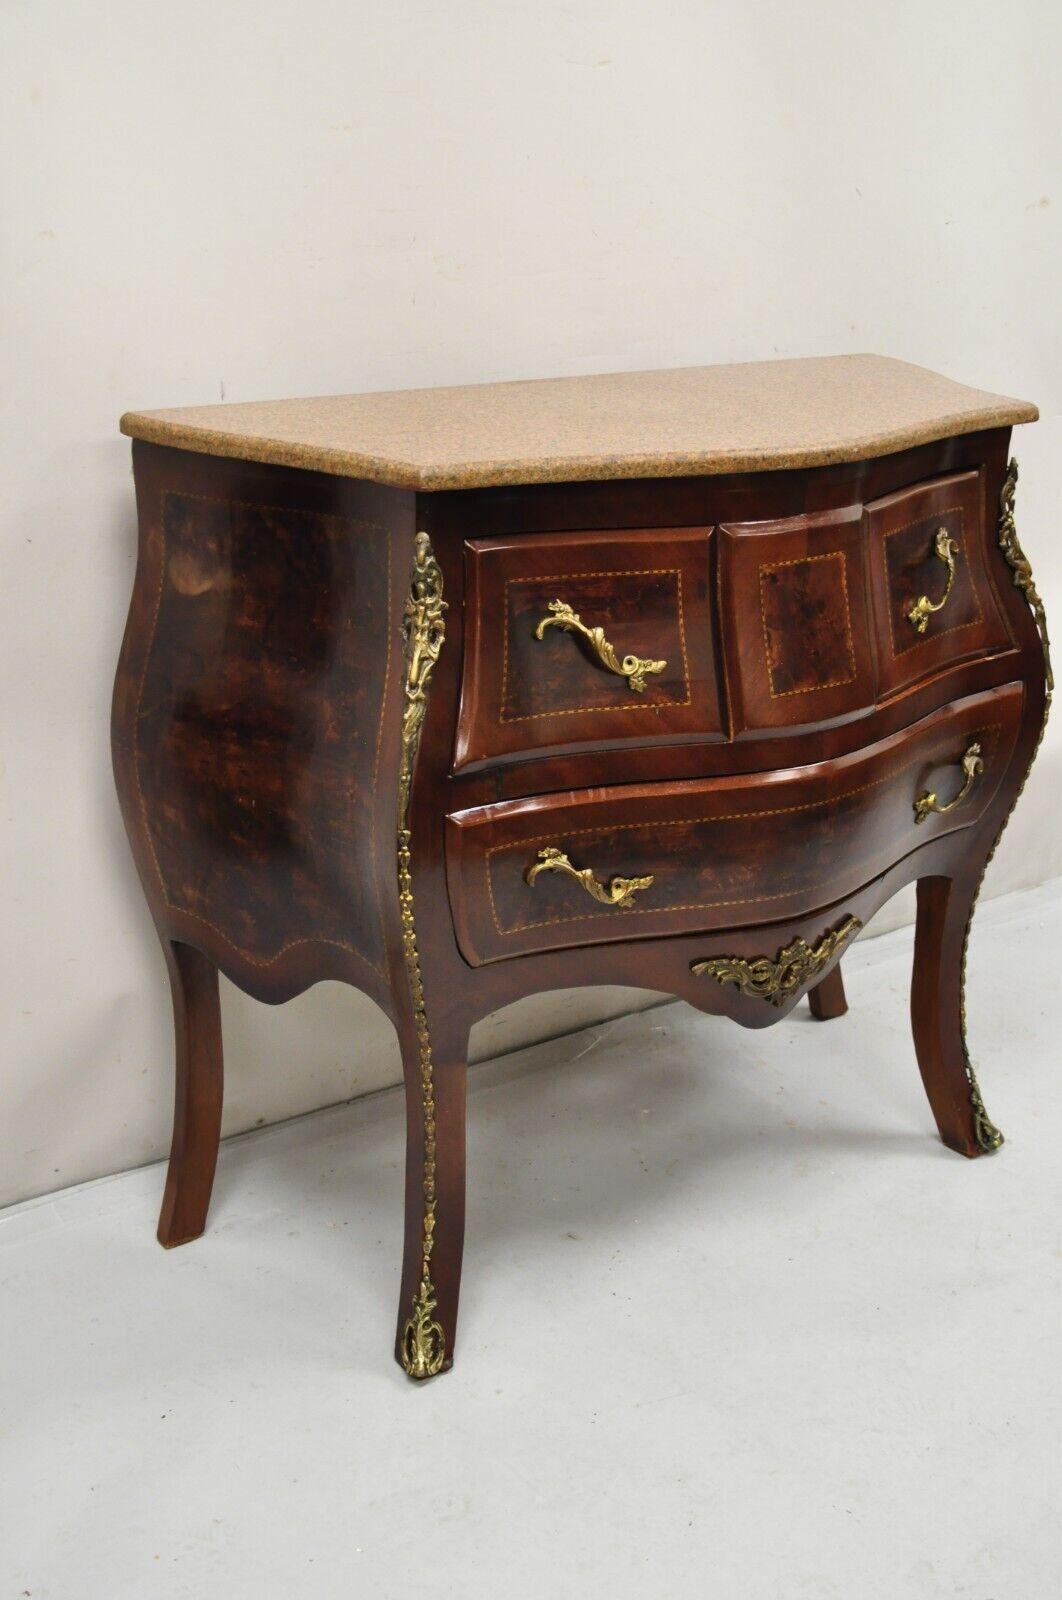 Vintage French Louis XV Style Marble Top Bombe Chest Dresser Commode. Item features 3 drawers, bronze ormolu, pencil inlay, marble top, very nice vintage item. Circa Late 20th Century. Measurements: 36.25